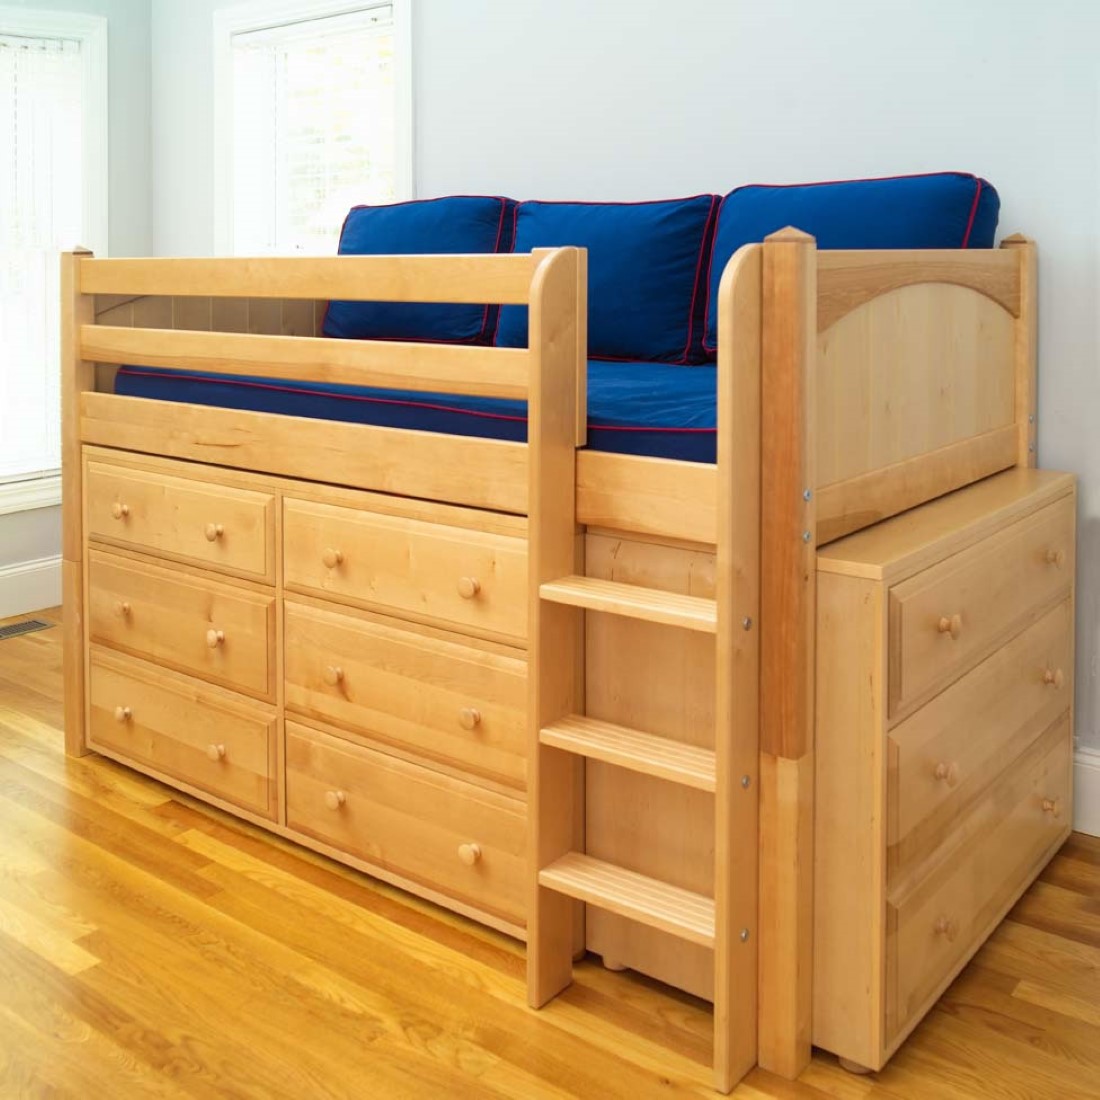 Twin Loft With Trendy Twin Loft Bed Ideas With Dark Blue Pillow Covers And Vertical Ladder From Wooden Elements Kids Room 30 Functional Twin Loft Bed Design Furniture With Desk For Kids